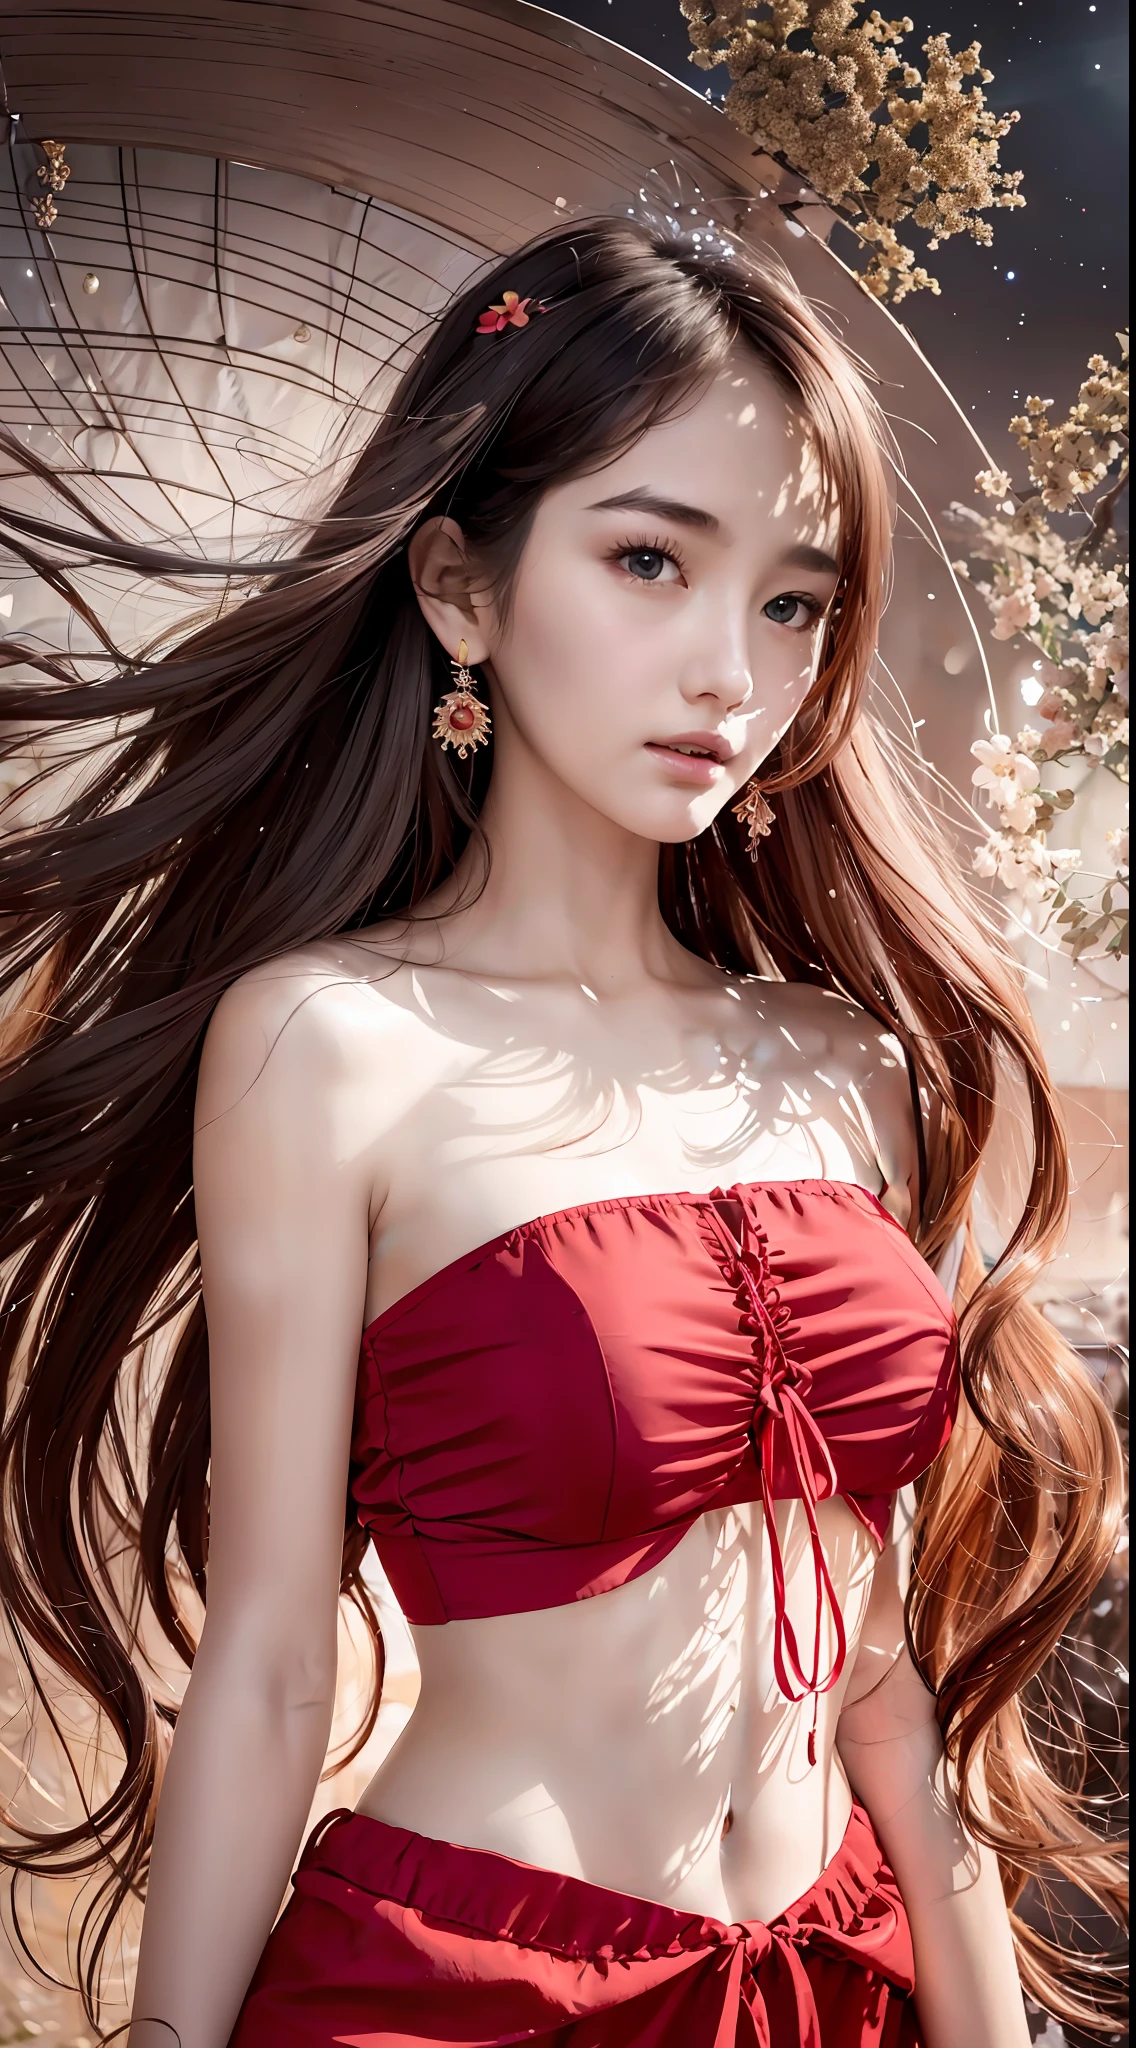 Delicate facial features, a beautiful girl, a red bandeau on the top, red pants underneath, an antique dress, hand-held strings, long hair draped over the shoulders, floating in space